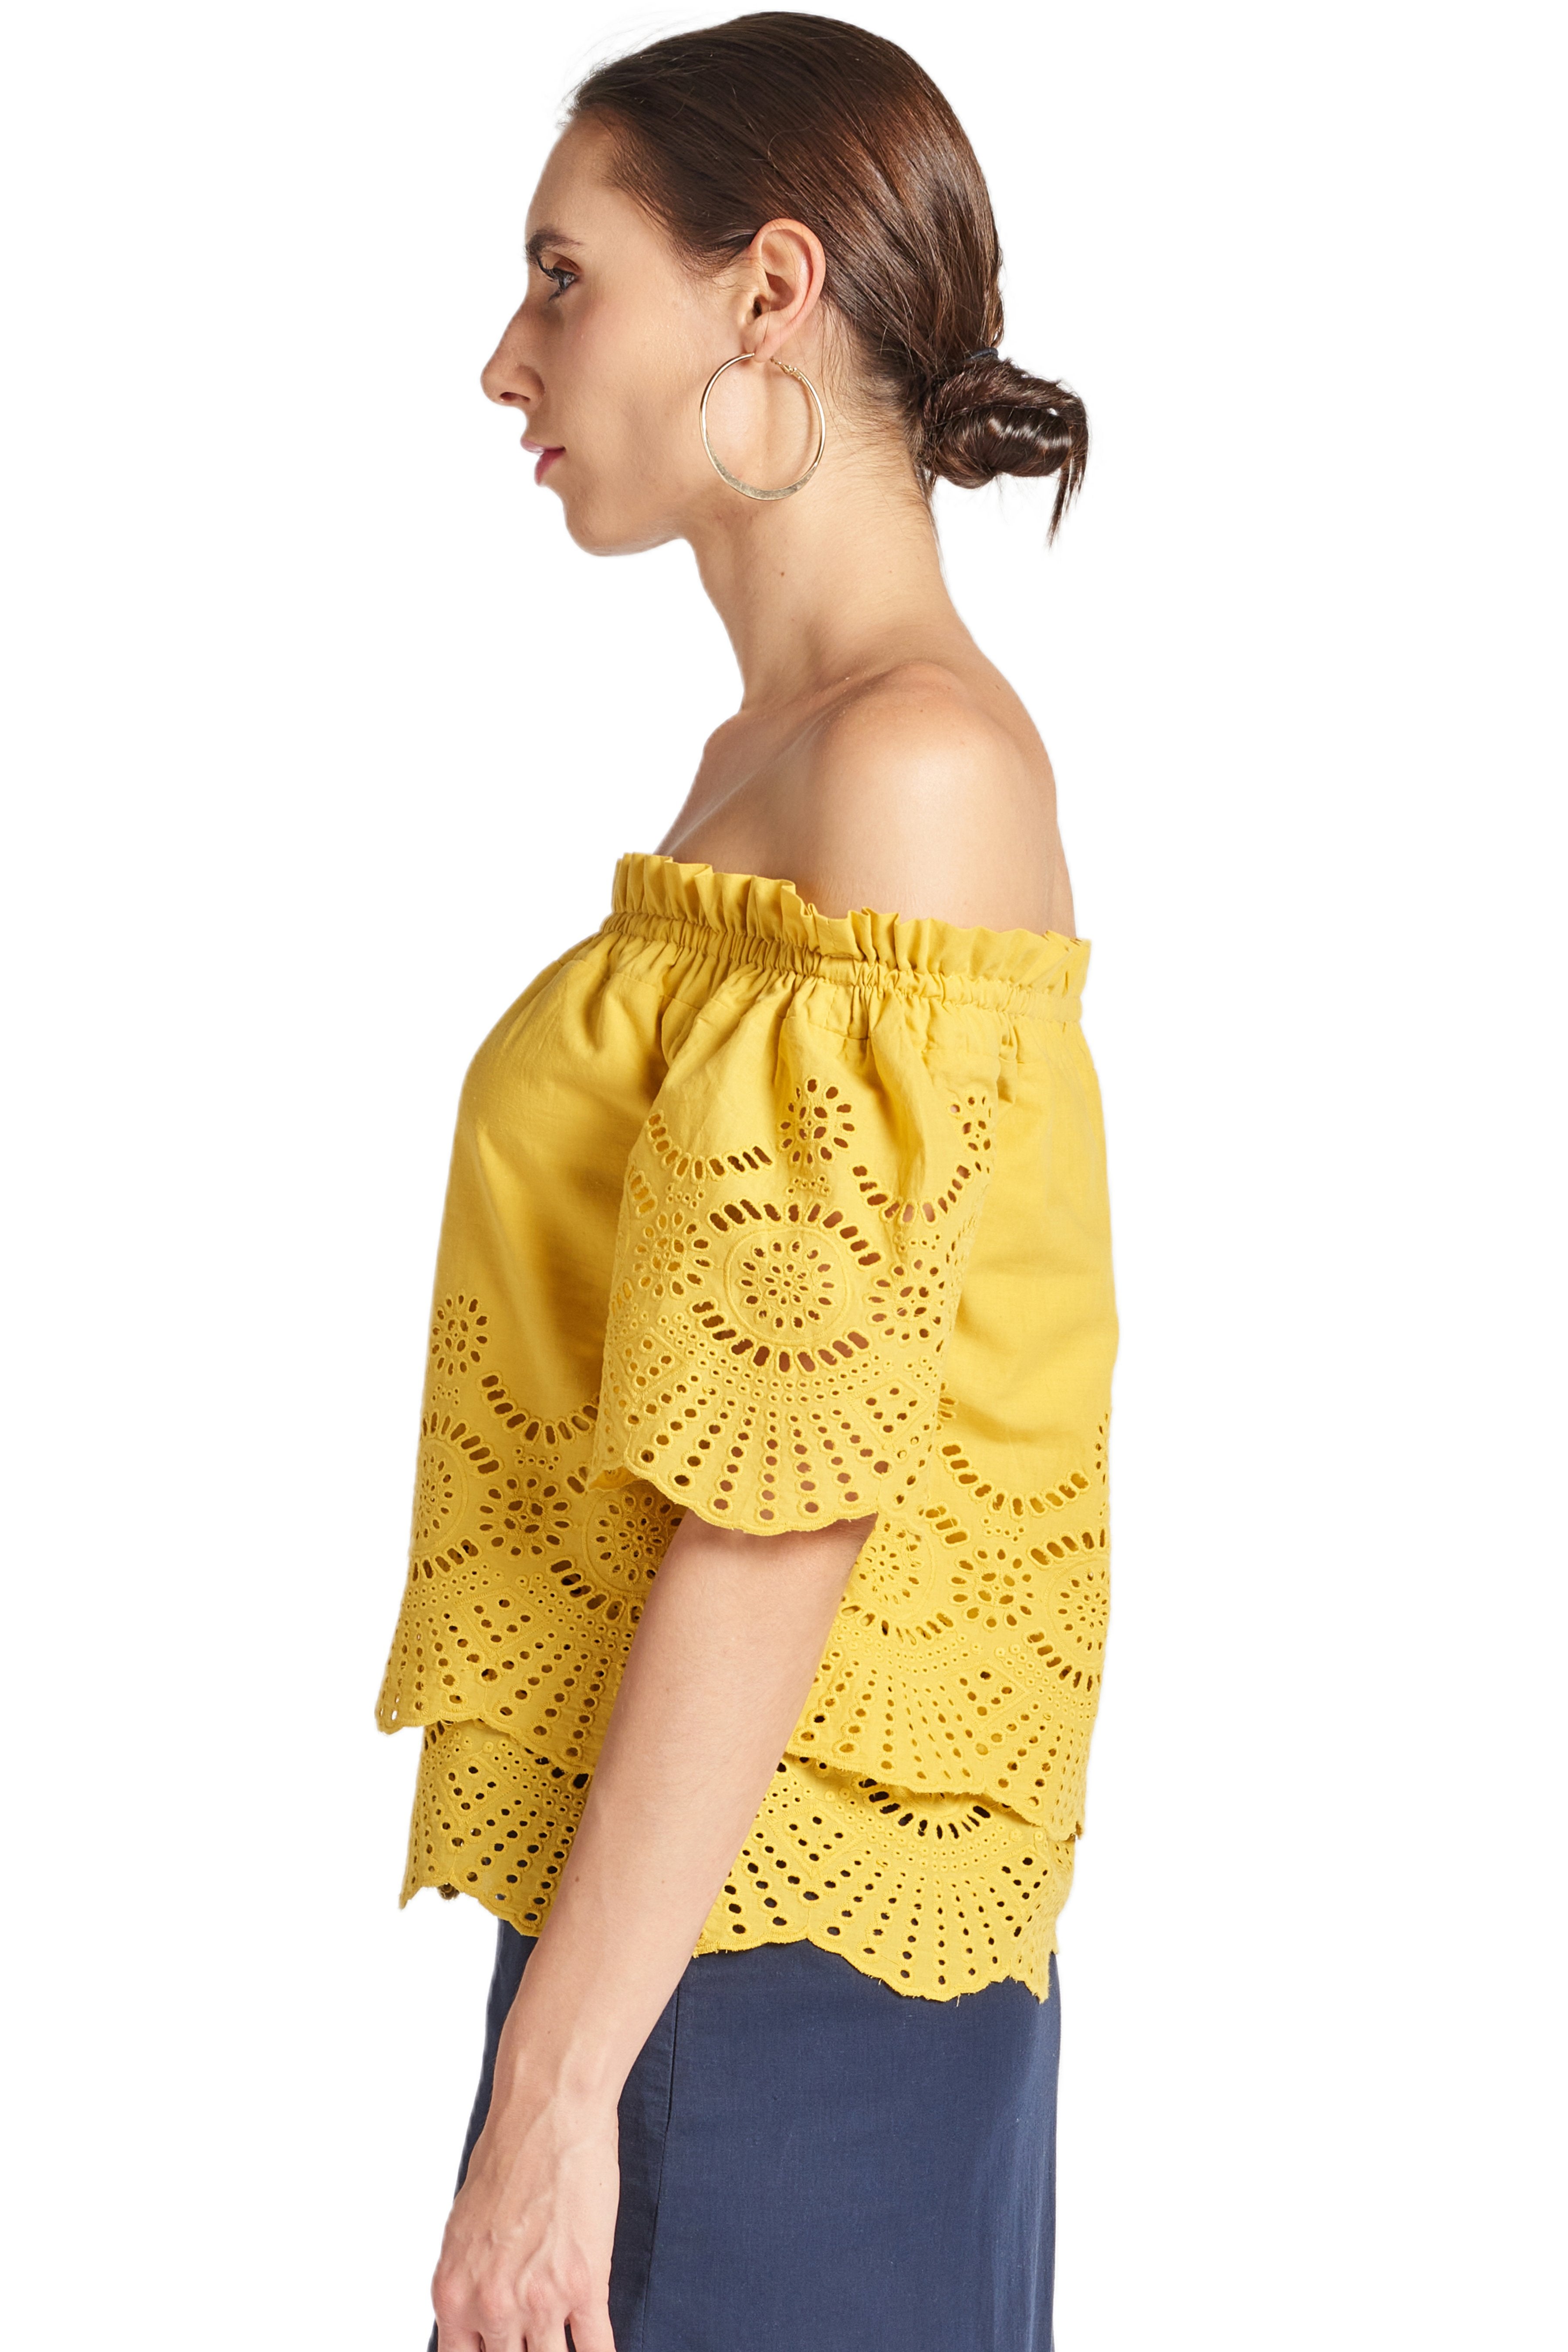 Side view of model wearing yellow off the shoulder cotton eyelet top with scalloped short sleeves and scalloped bottom hems.